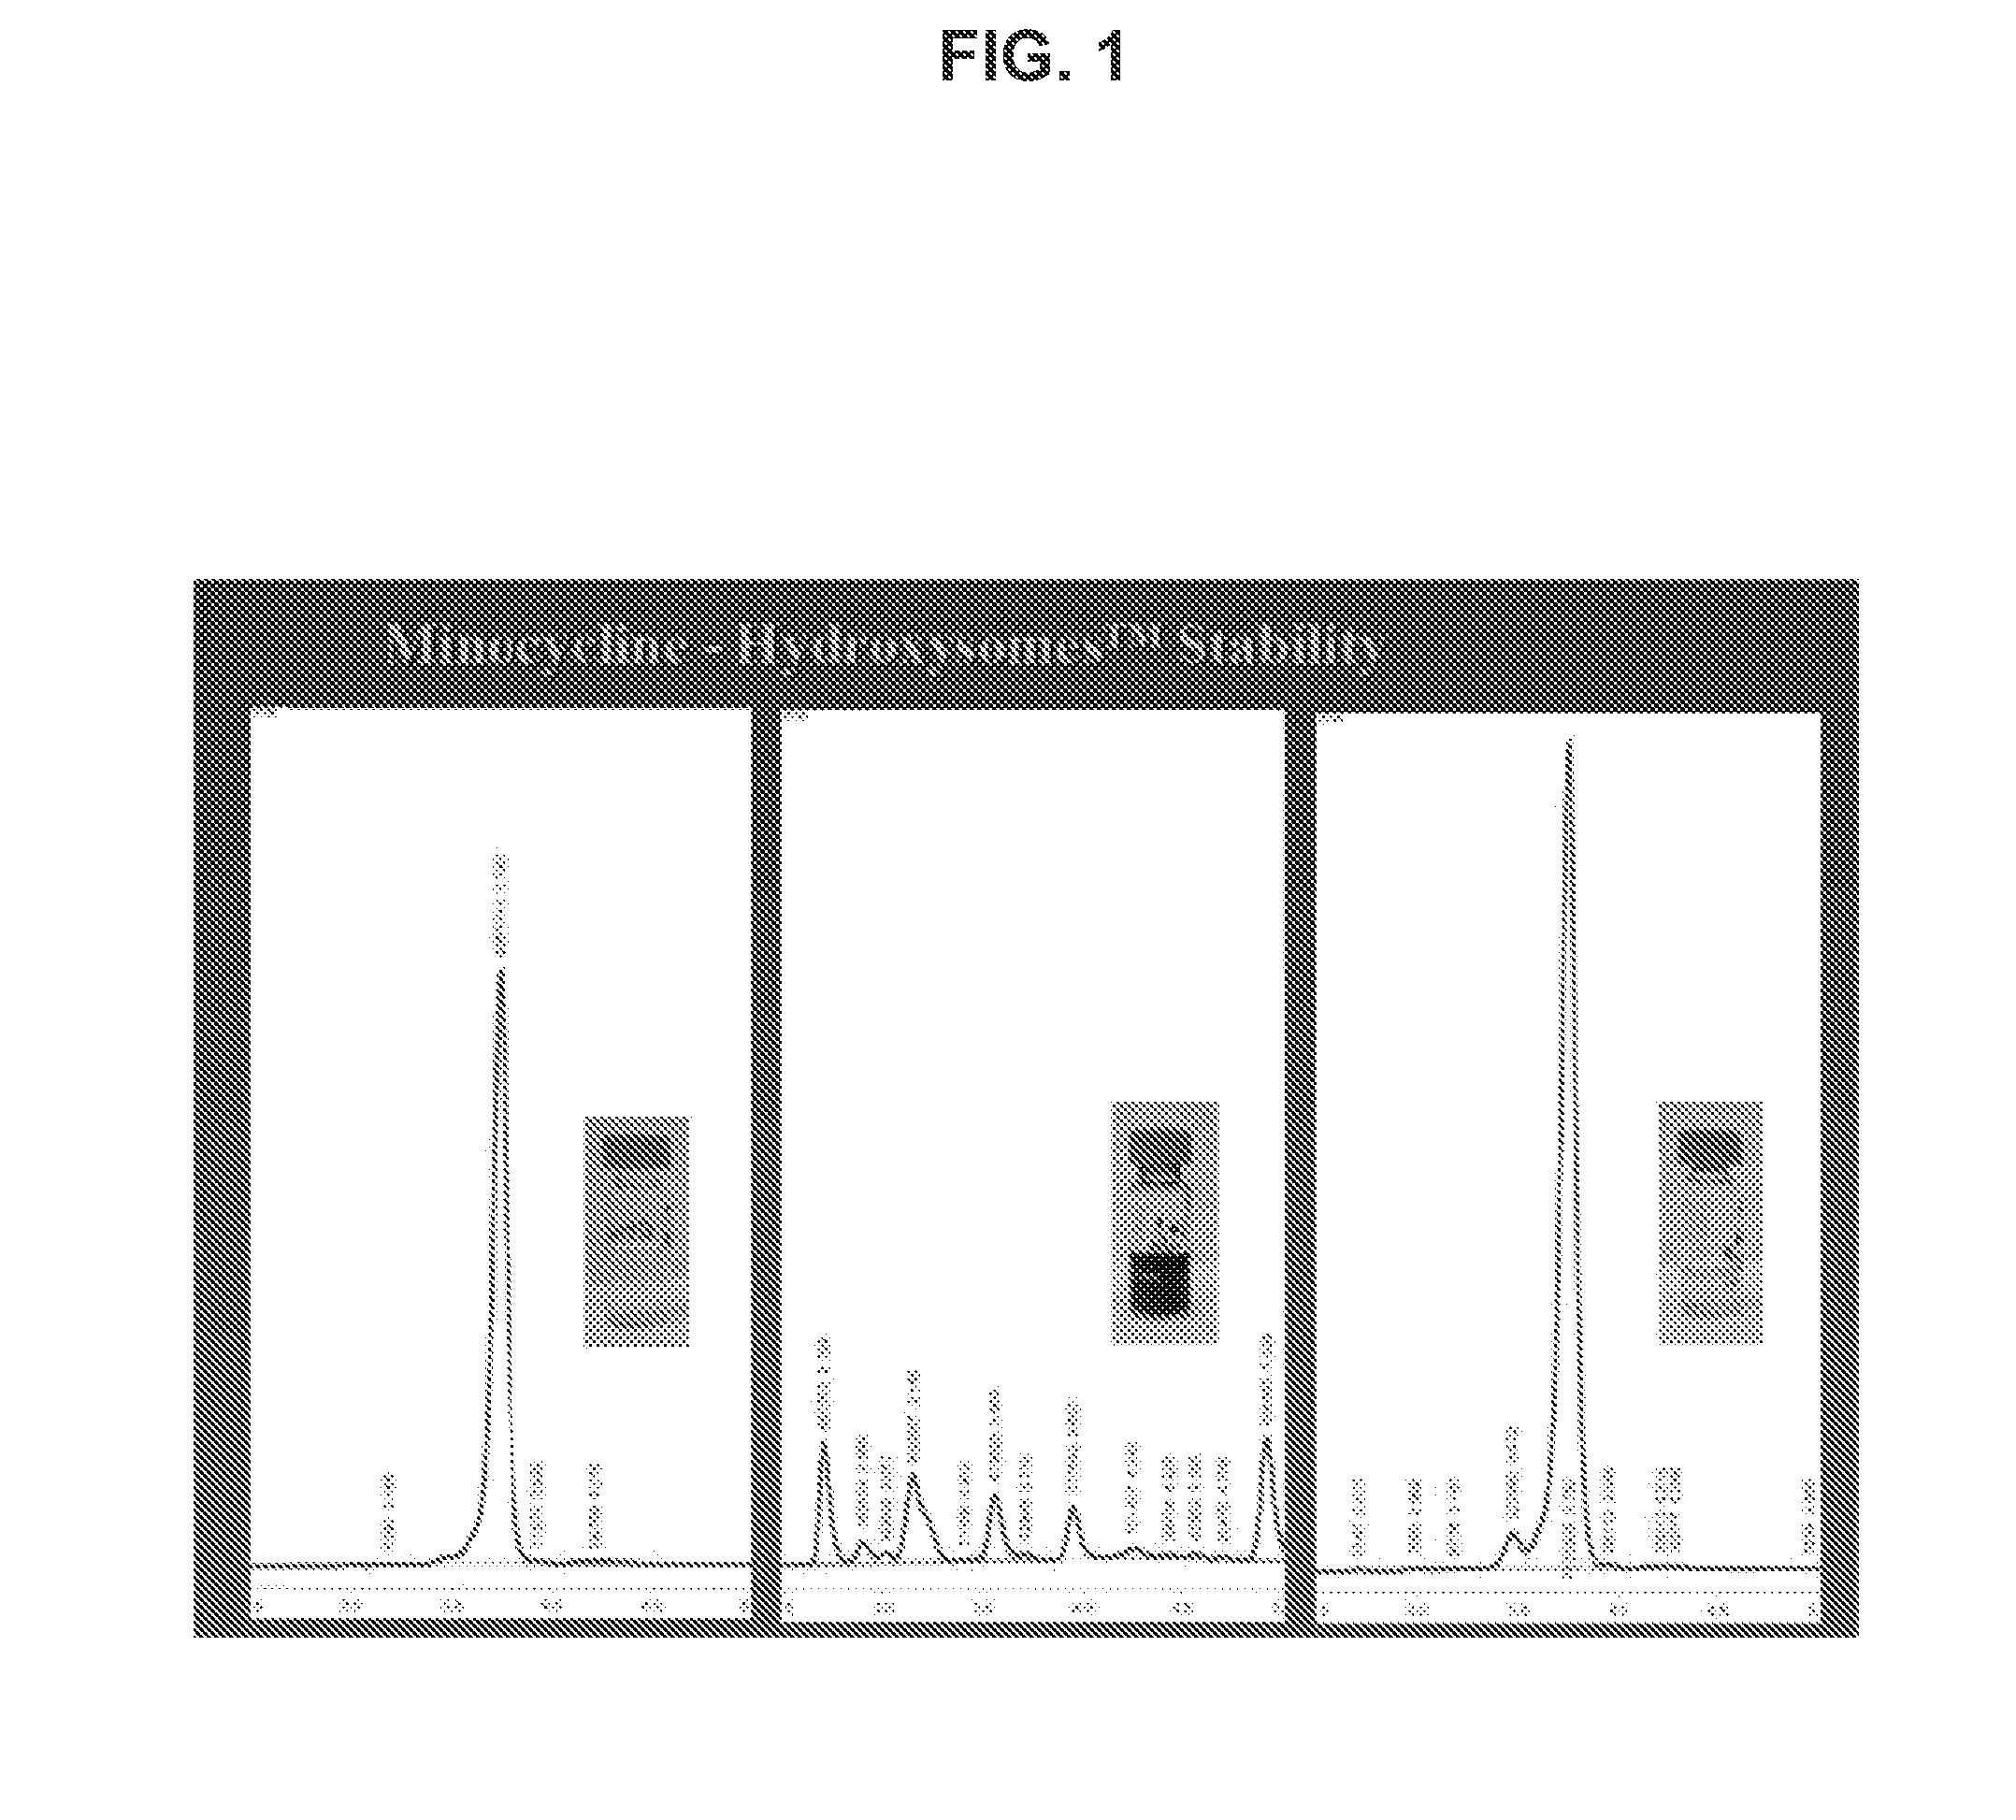 Topical Minocycline Compositions and Methods of Using the Same